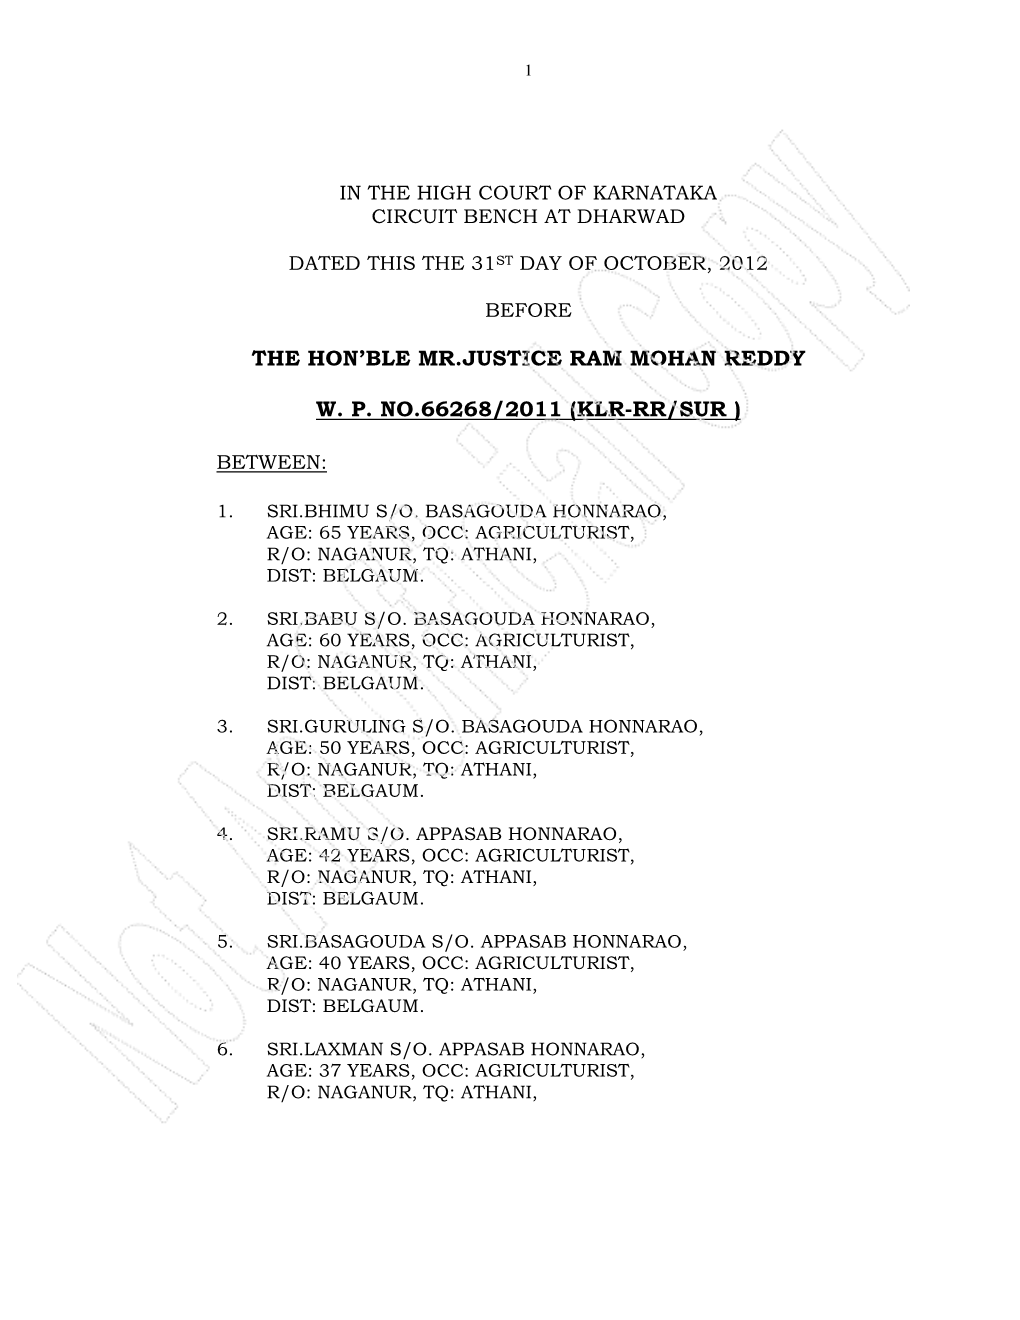 The Hon'ble Mr.Justice Ram Mohan Reddy W. P. No.66268